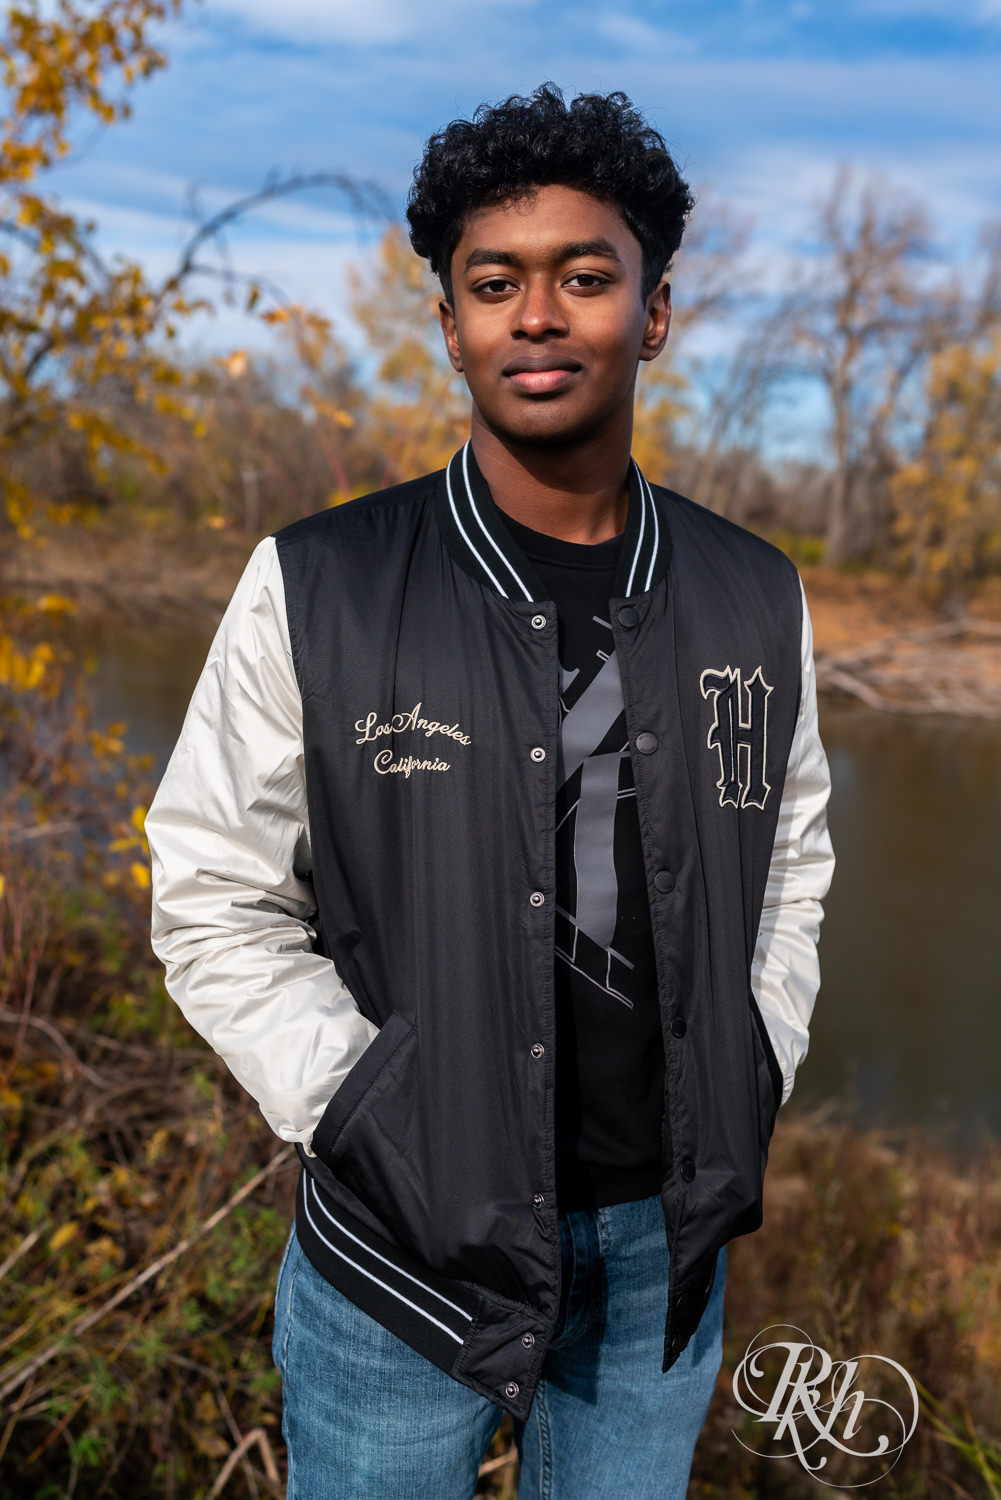 Indian senior boy poses wearing jacket for senior photography with fall leaves around him.